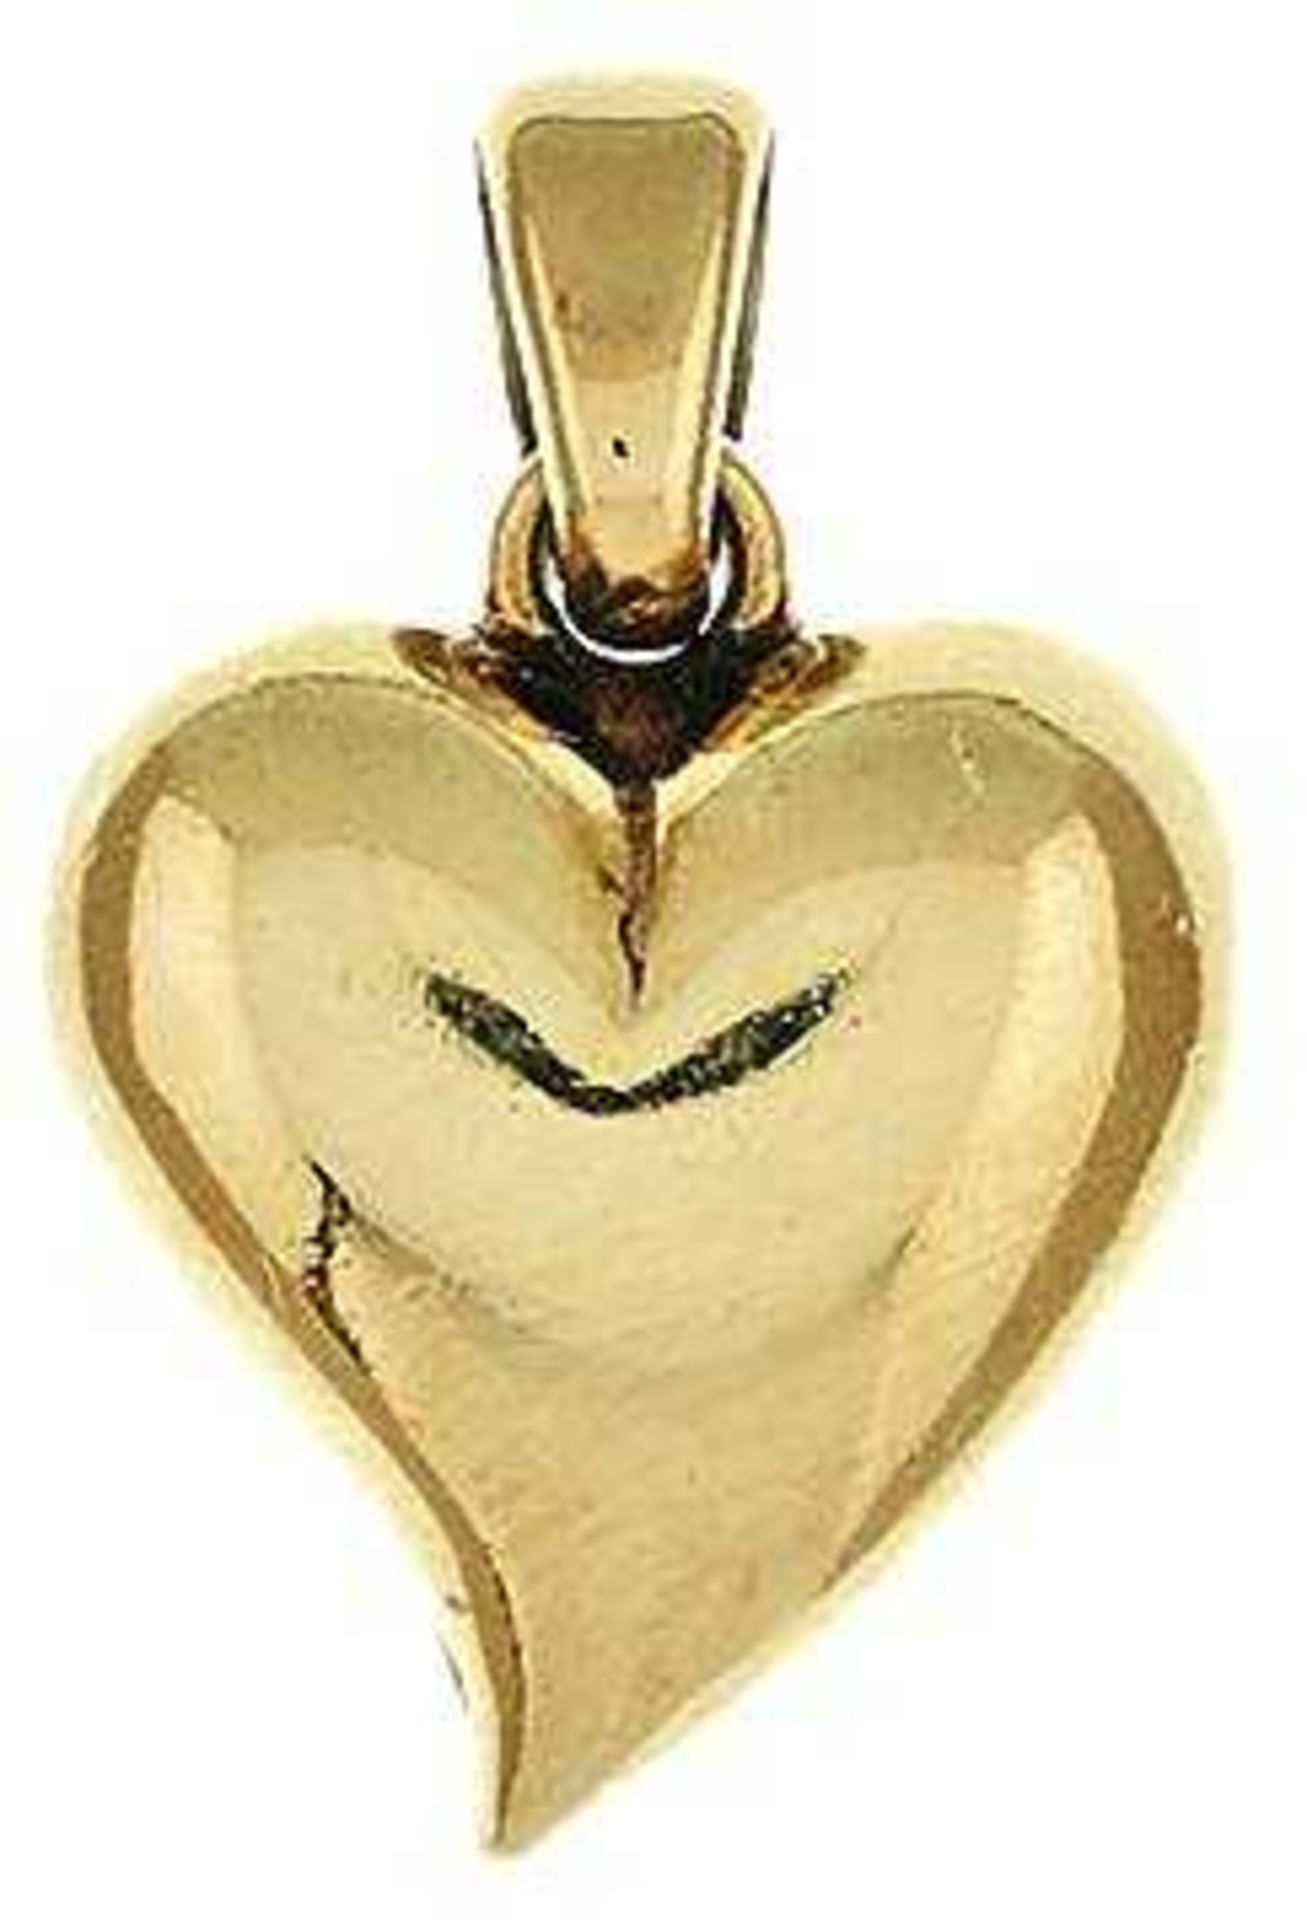 Brillant pendant in the shape of a heart, 585 yellow gold, 5, 25 g, 14, 5 x 21, 1 x 7, 3 mm (with ey